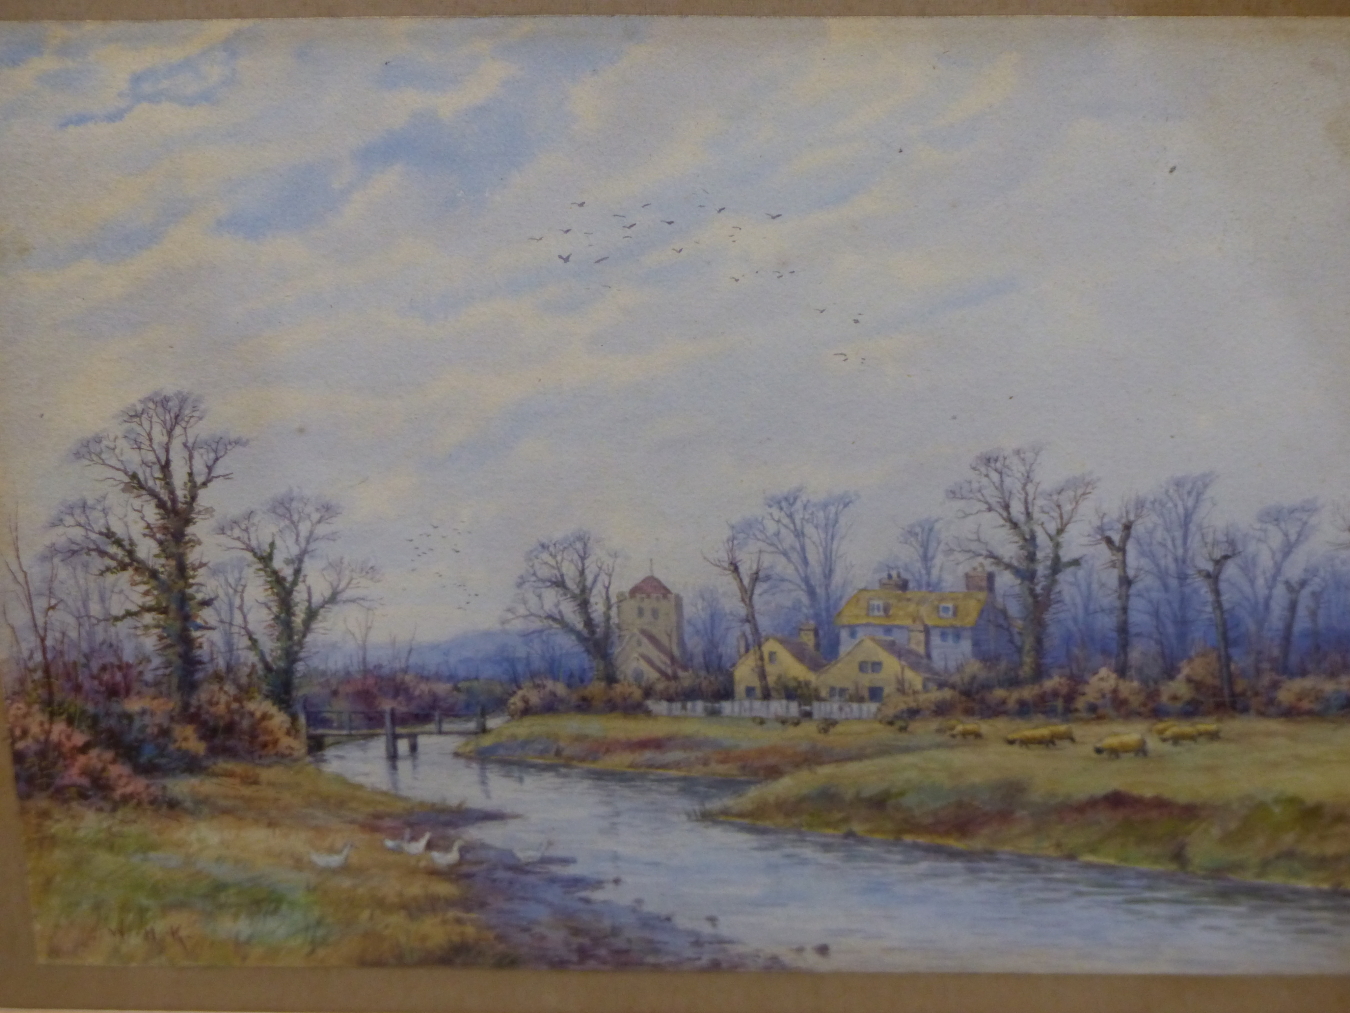 ENGLISH SCHOOL 19TH C. A PAIR OF FINELY DETAILED BUCOLIC ENGLISH RIVER SCENES, MONOGRAMMED W.H.K. - Image 4 of 5